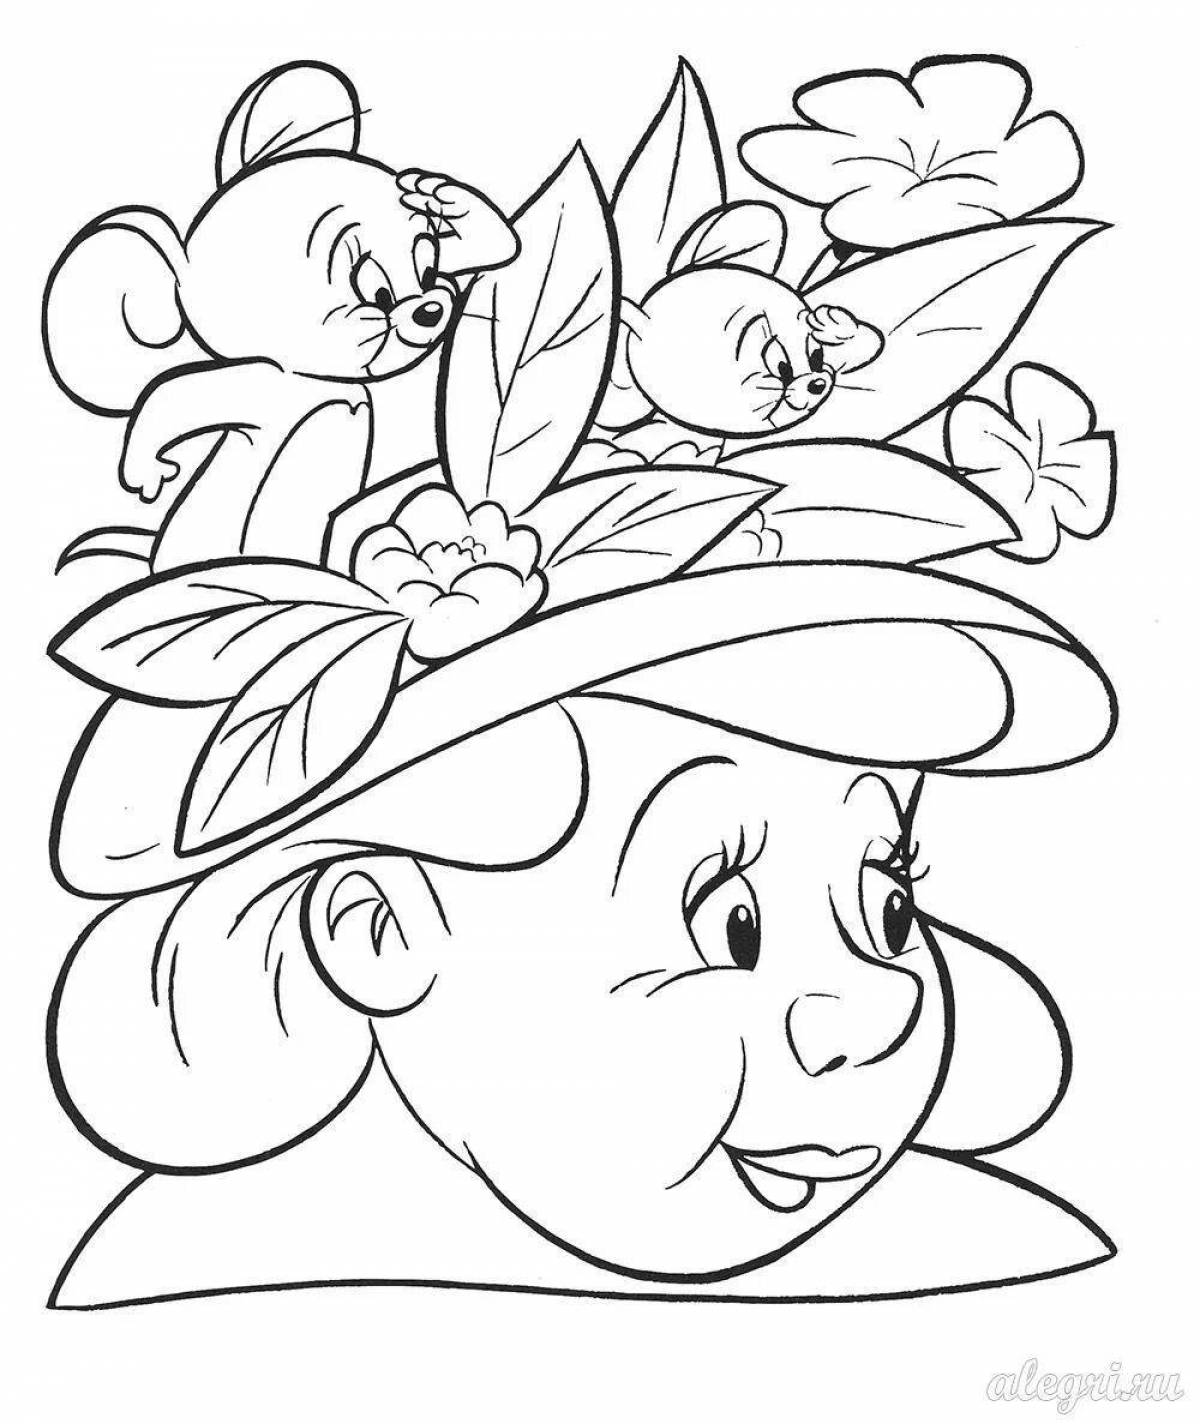 Playful pound coloring page for kids